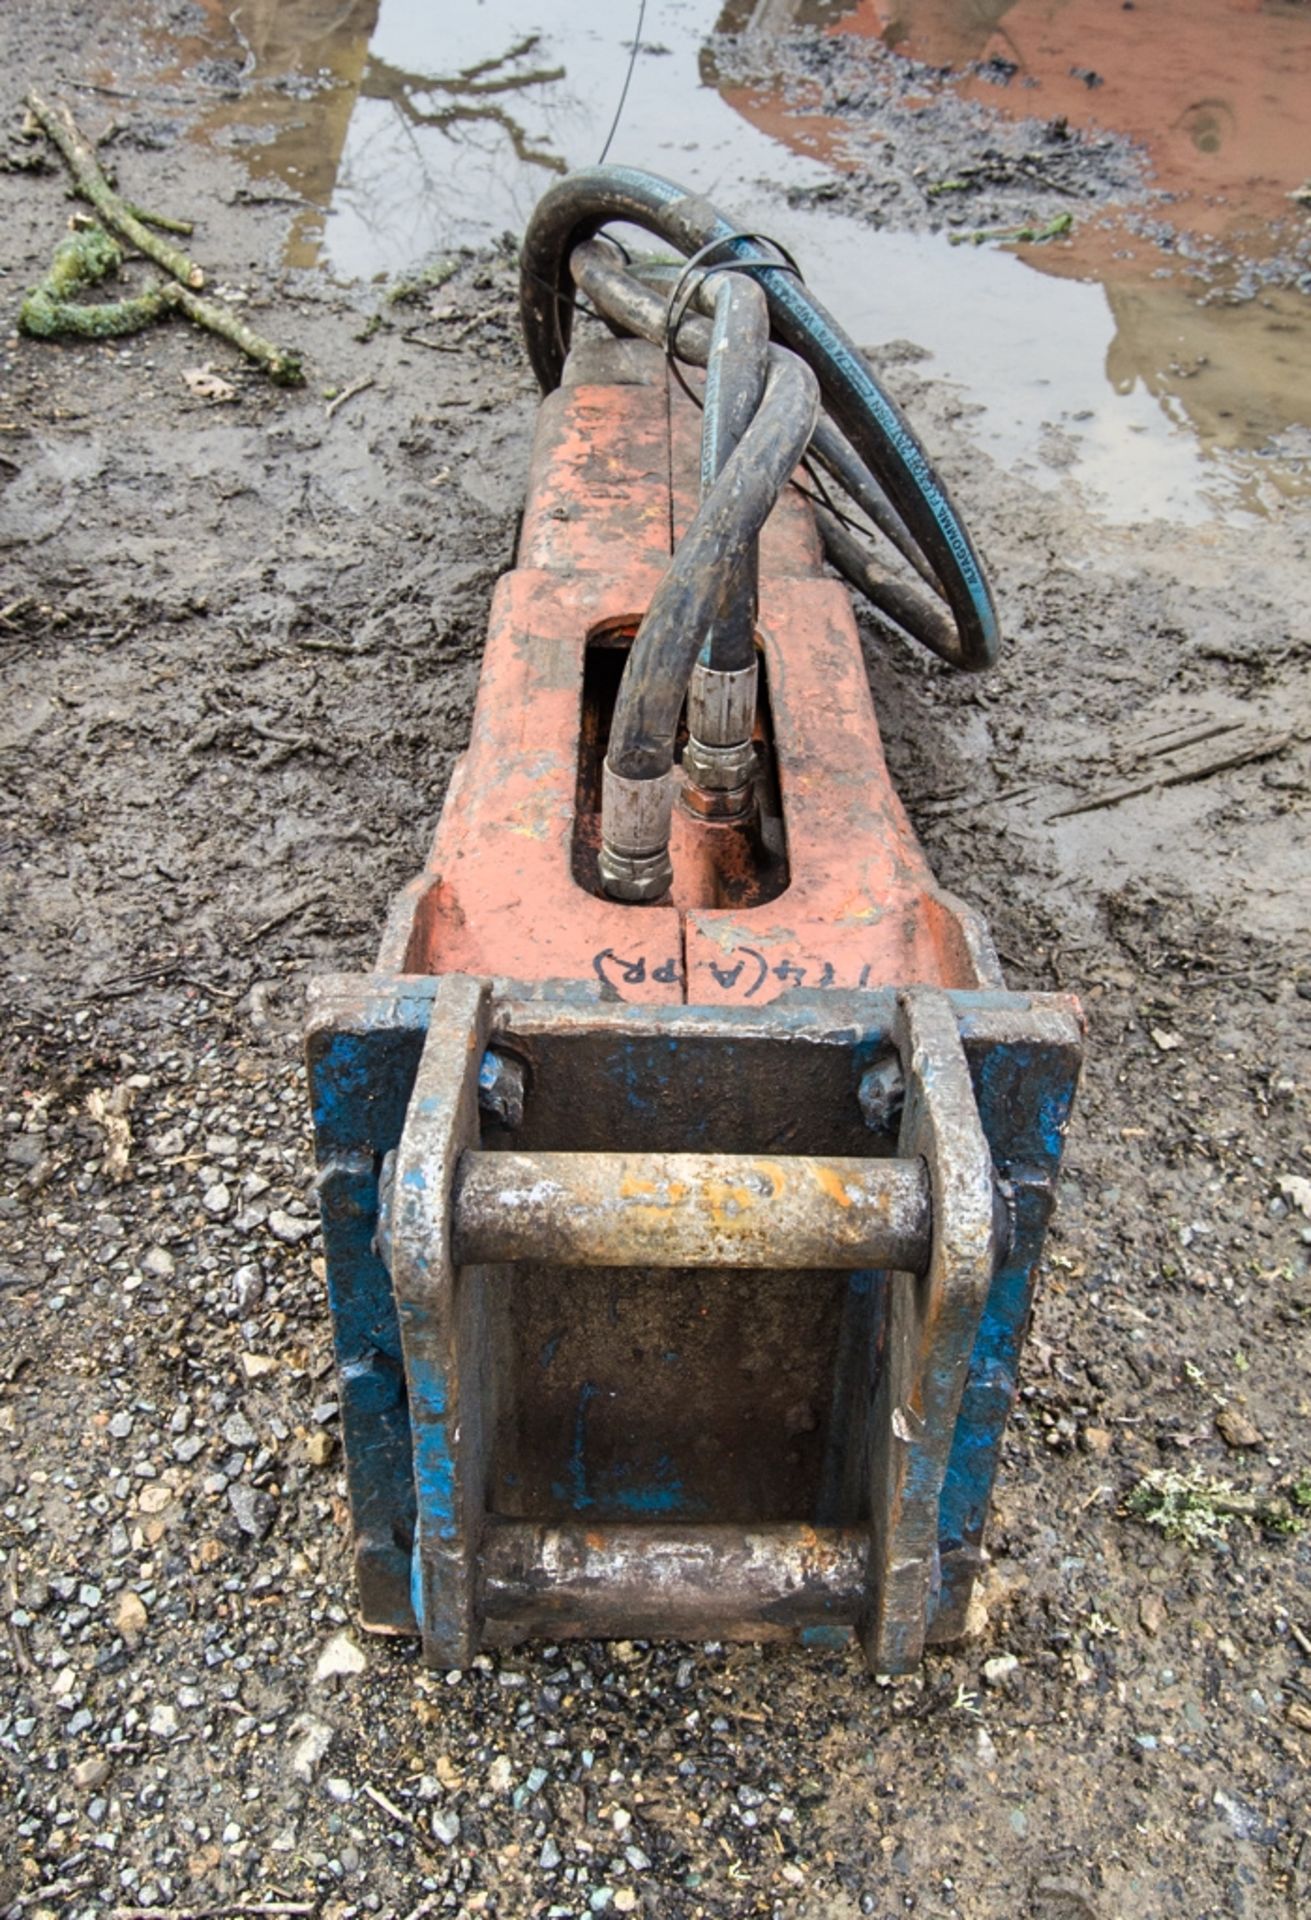 Indeco hydraulic breaker to suit excavator Pin diameter: 35mm Pin centres: 190mm Pin width: 140mm - Image 3 of 4